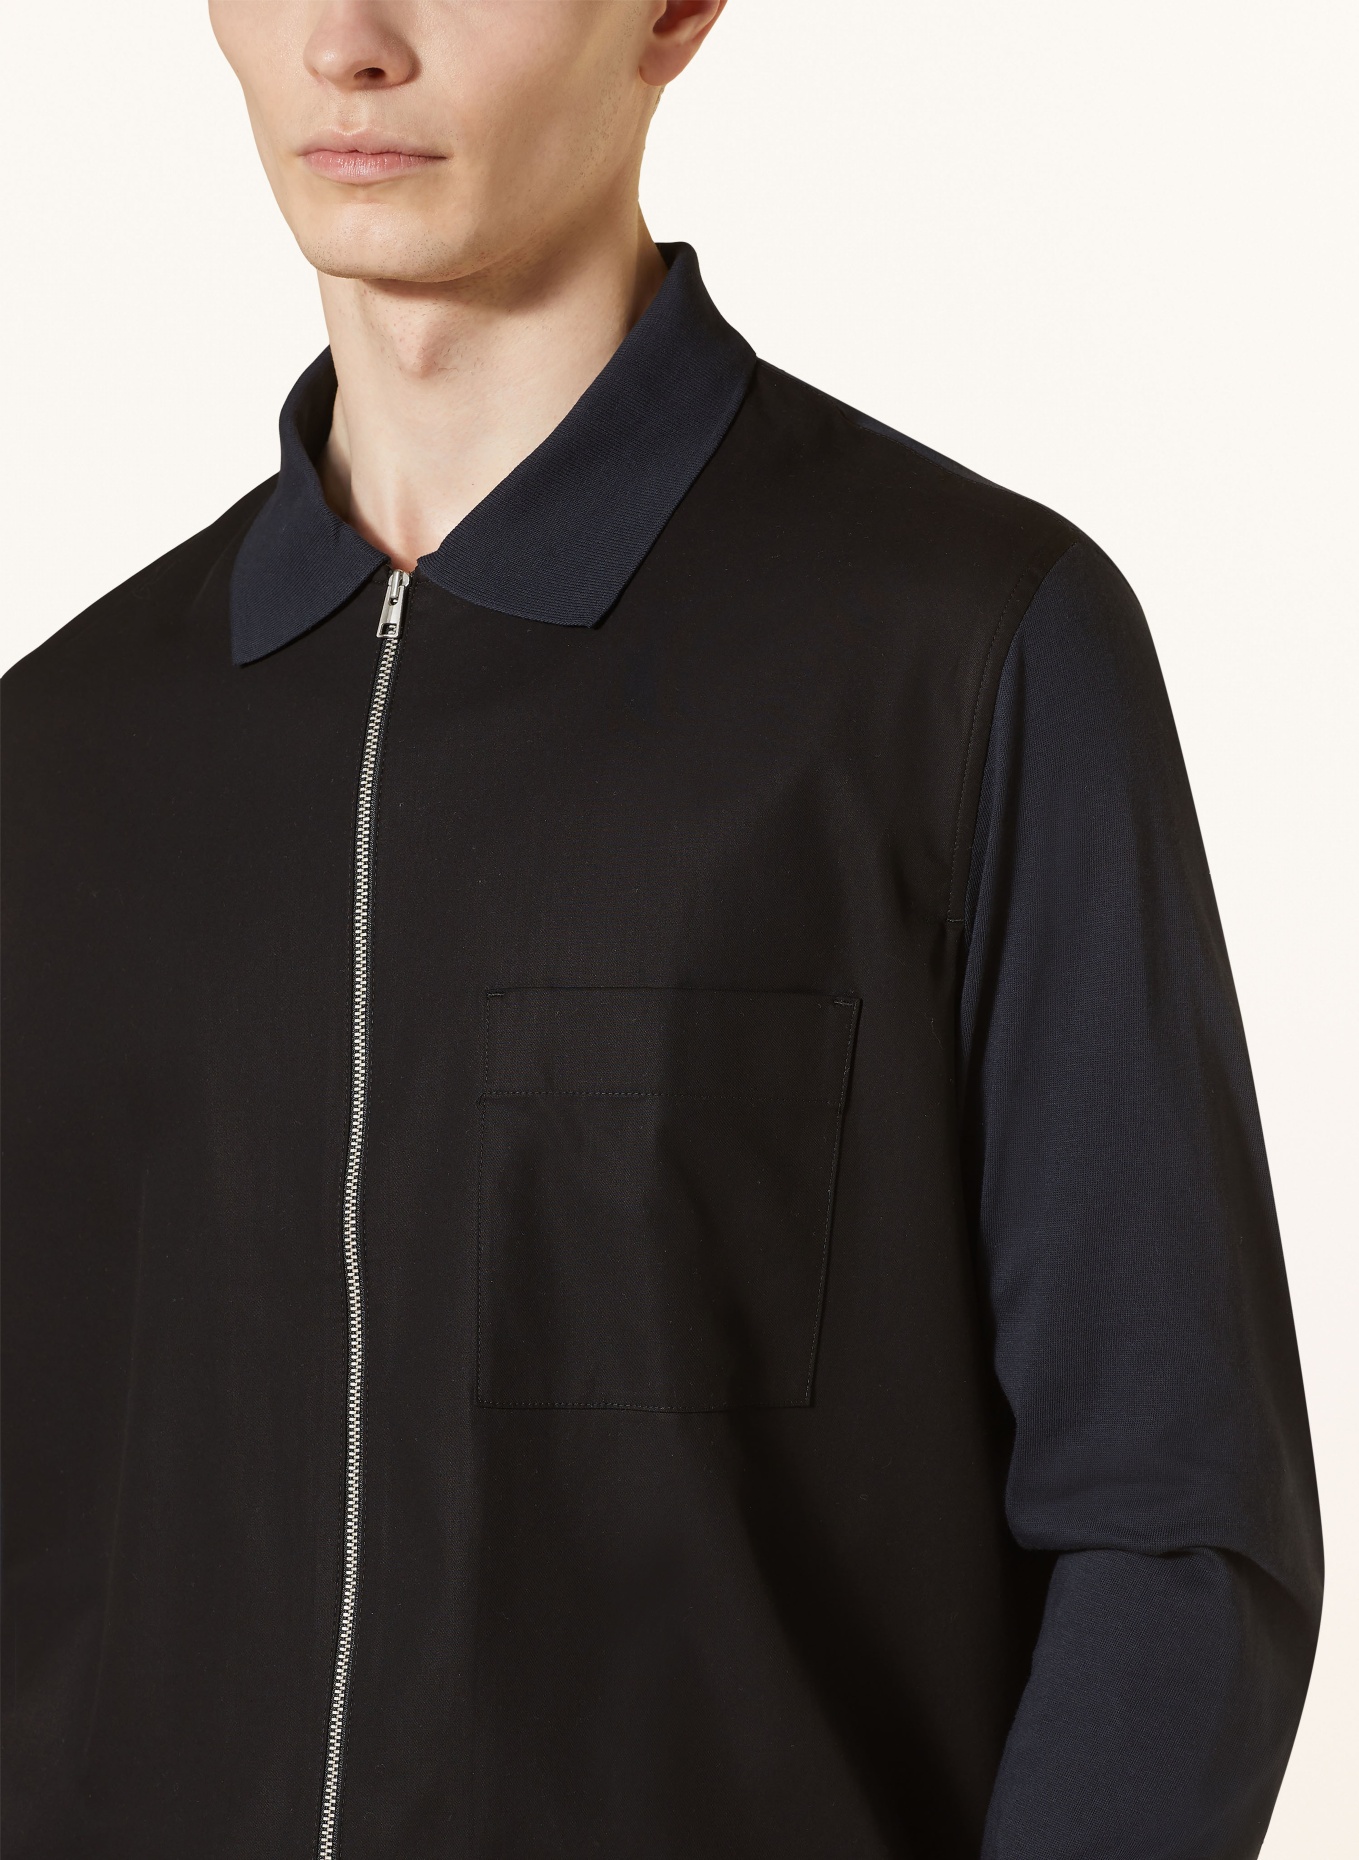 COS Overshirt in mixed materials, Color: BLACK/ DARK BLUE (Image 4)